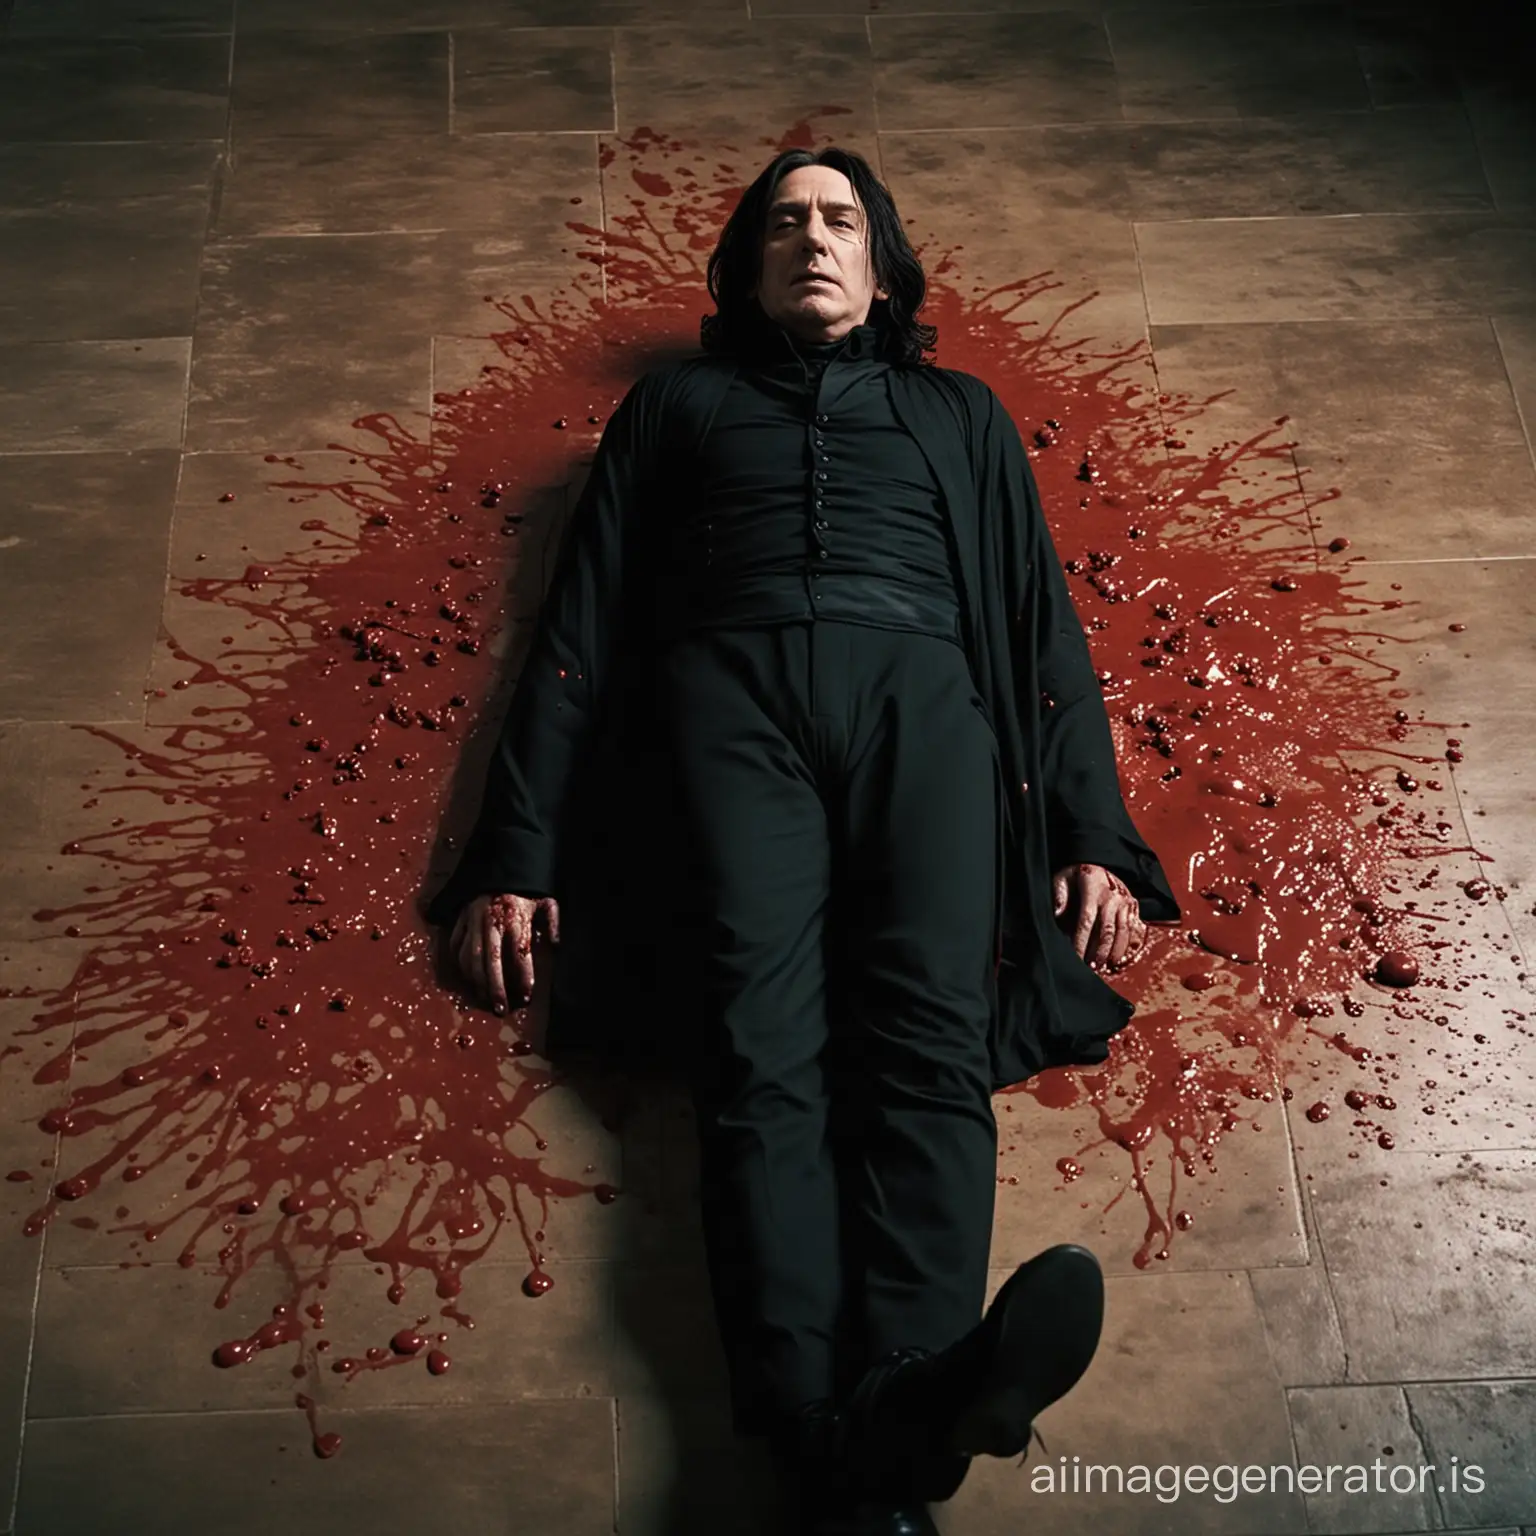 Severus Snape lying dead on the floor, covered in his own blood.